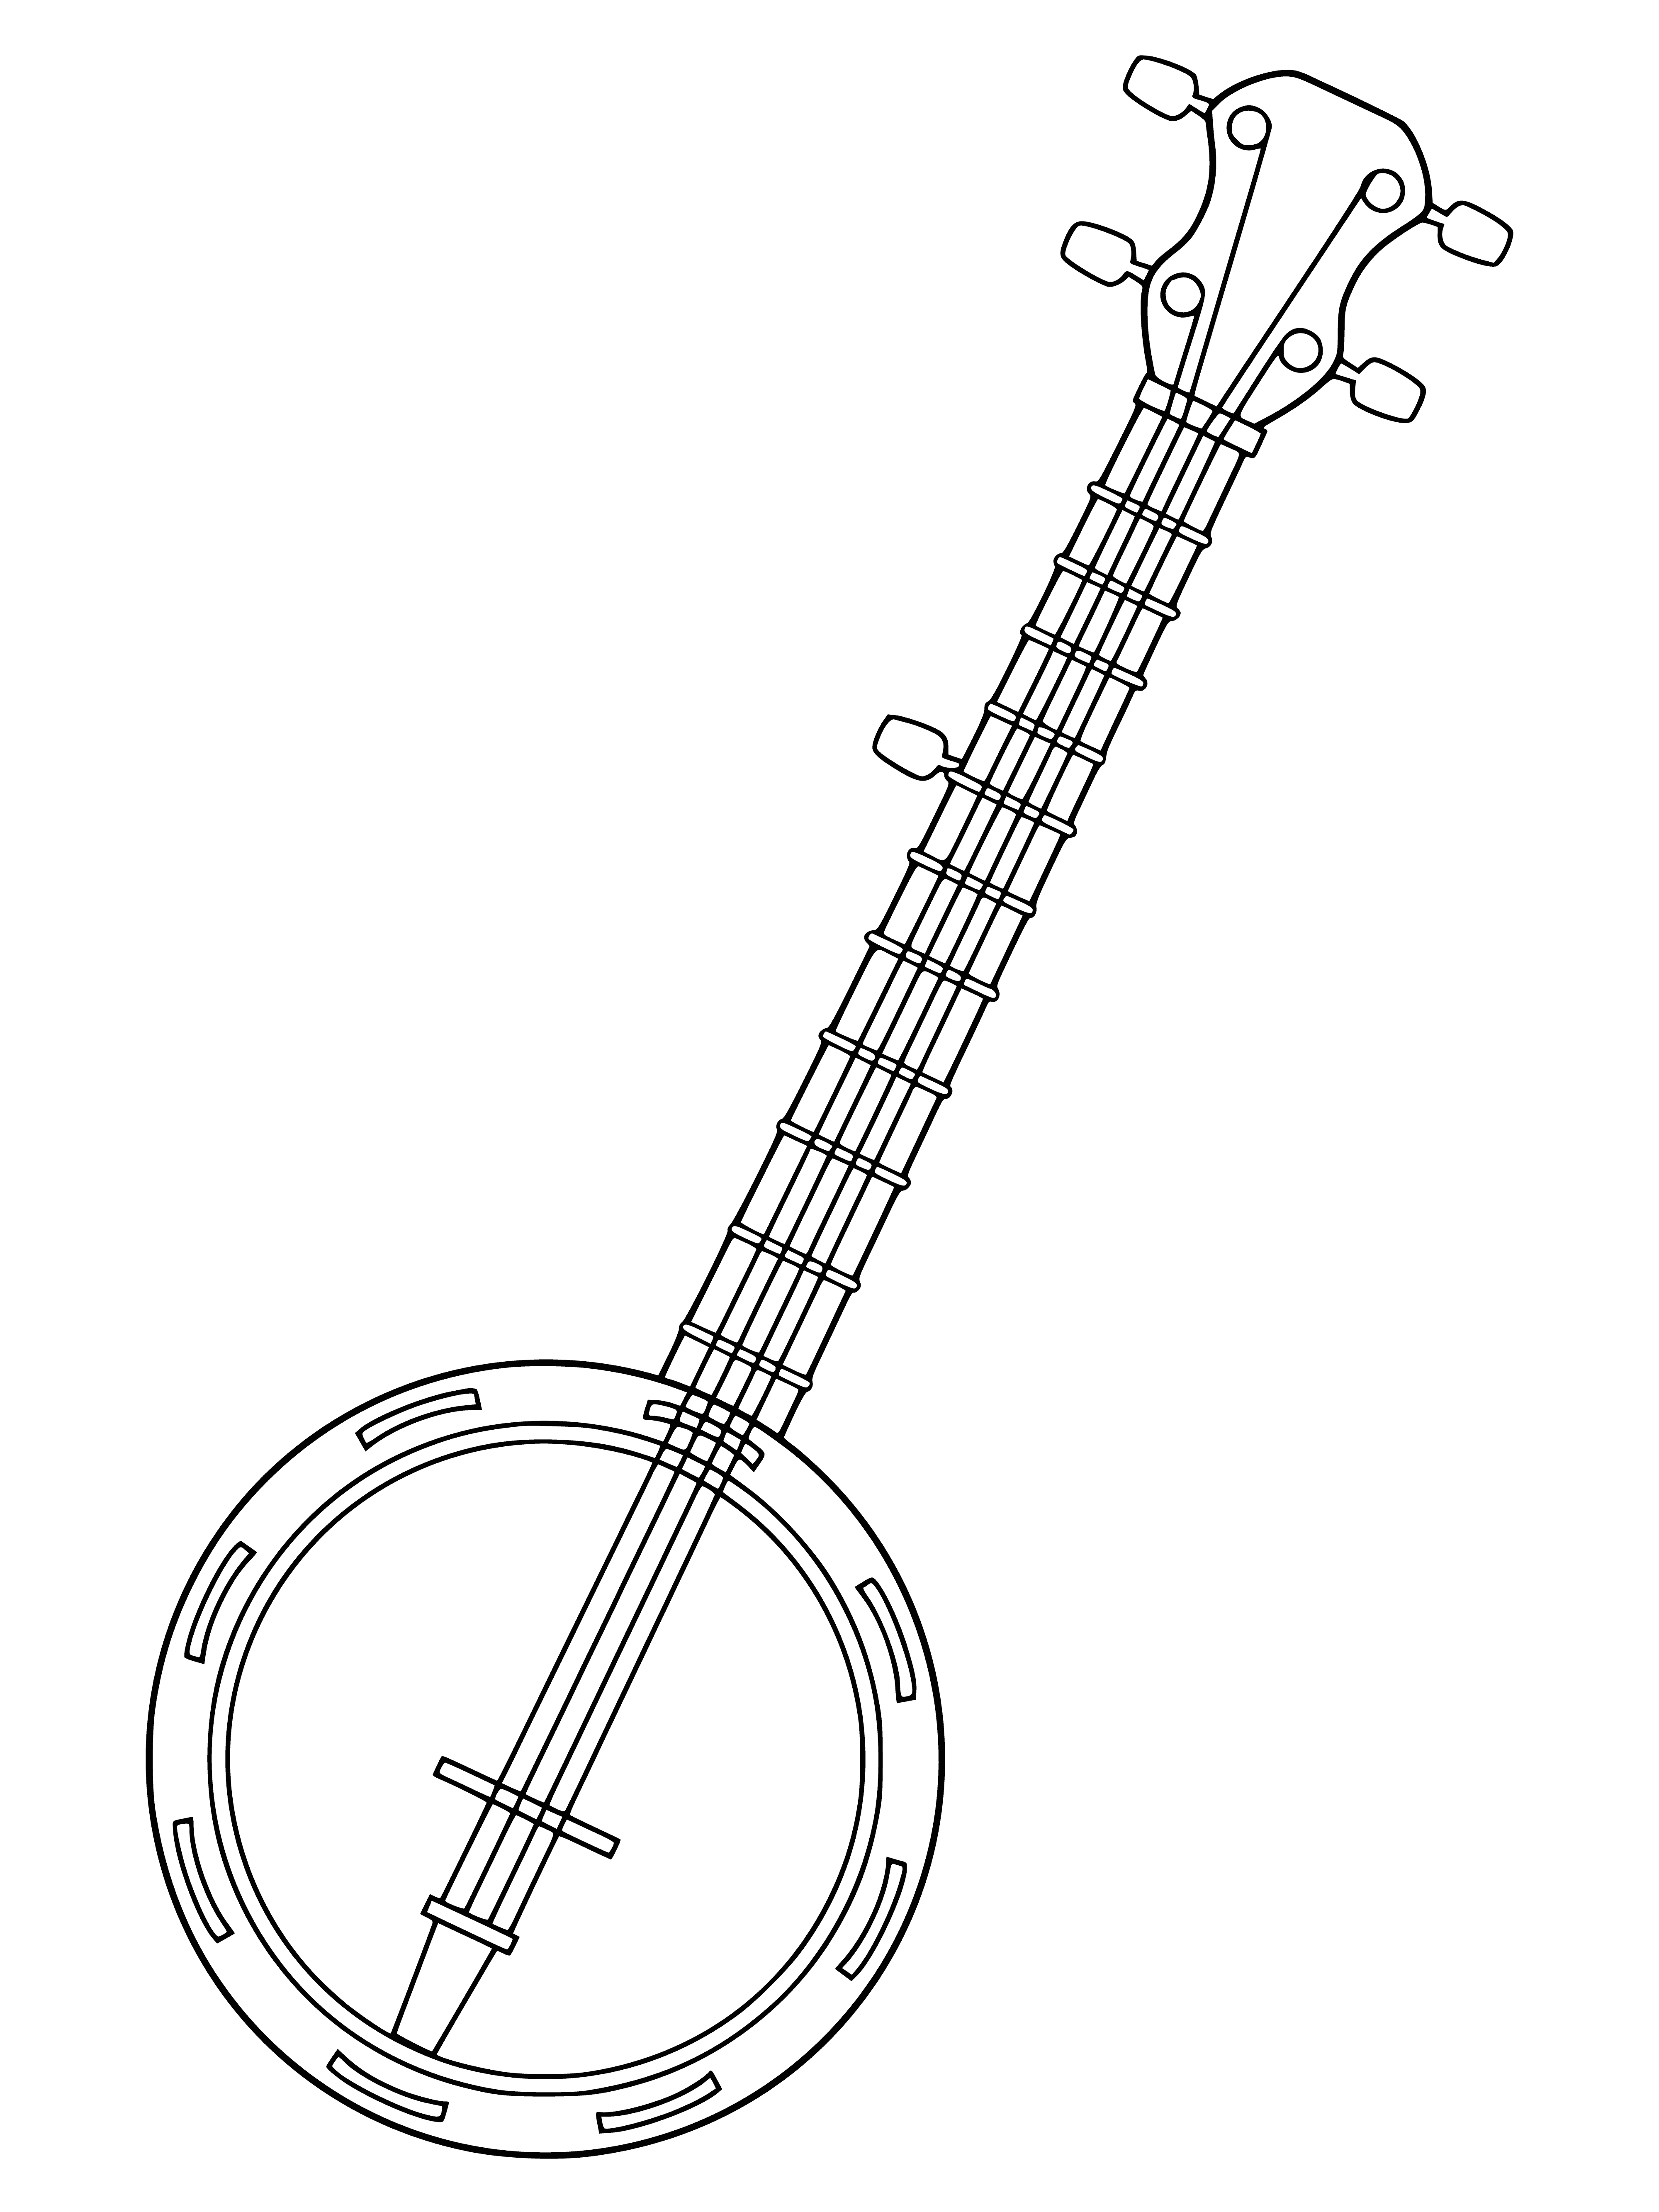 coloring page: Banjo is a stringed African-American instrument with a cylindrical body and membrane; played with fingers or pick.